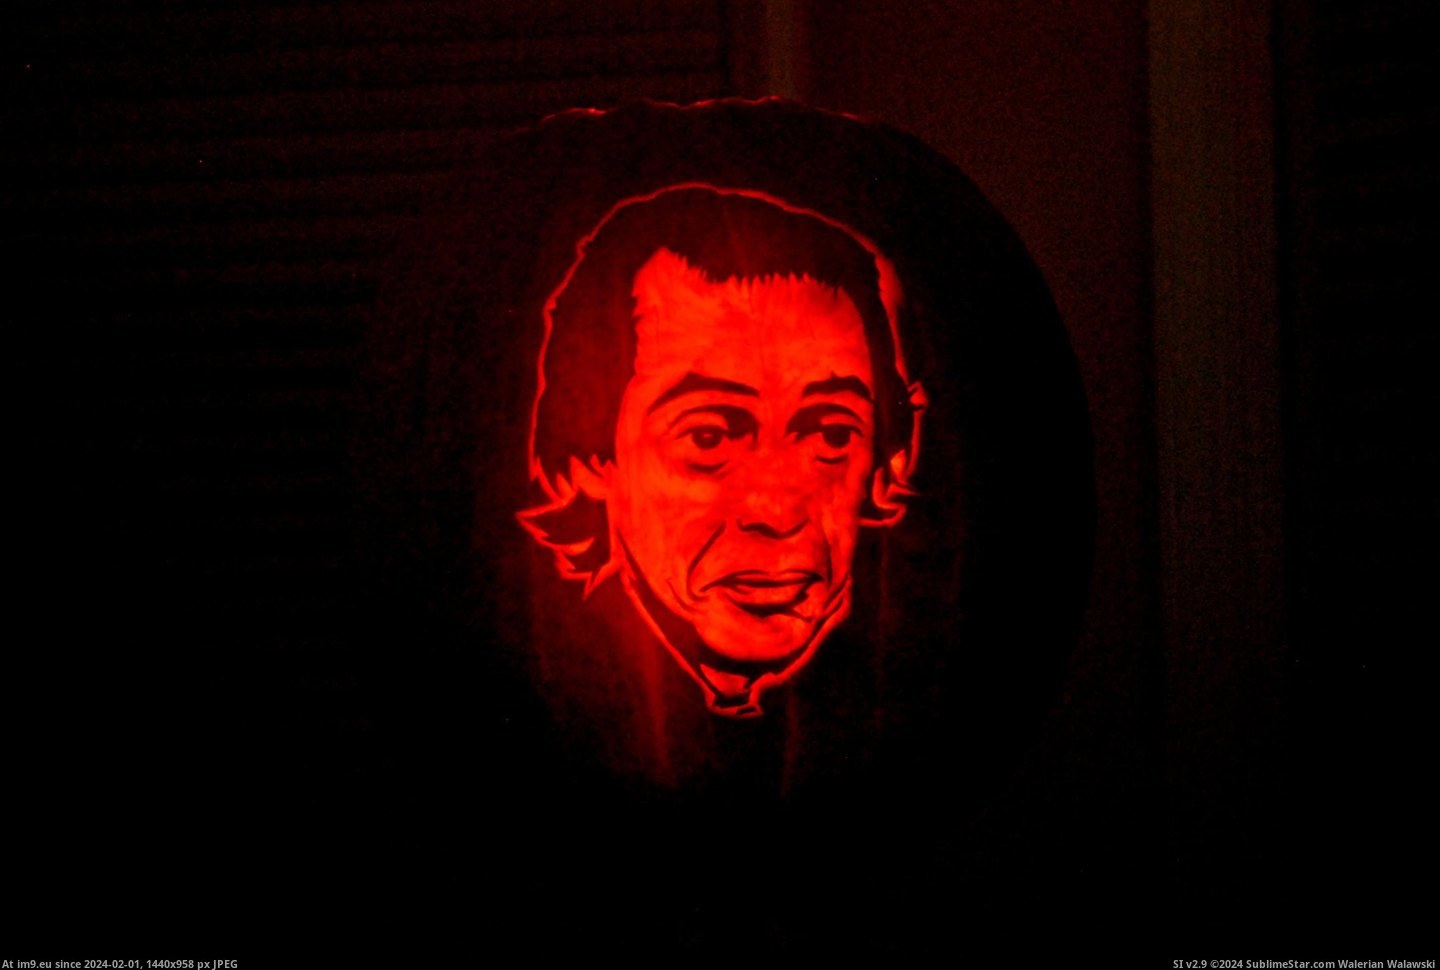 #Did #Eyes #Capture #Candles #Buscemi #Pumpkin #Steve [Pics] Found some candles! Here's my Steve Buscemi pumpkin. Did I capture his eyes? 1 Pic. (Изображение из альбом My r/PICS favs))